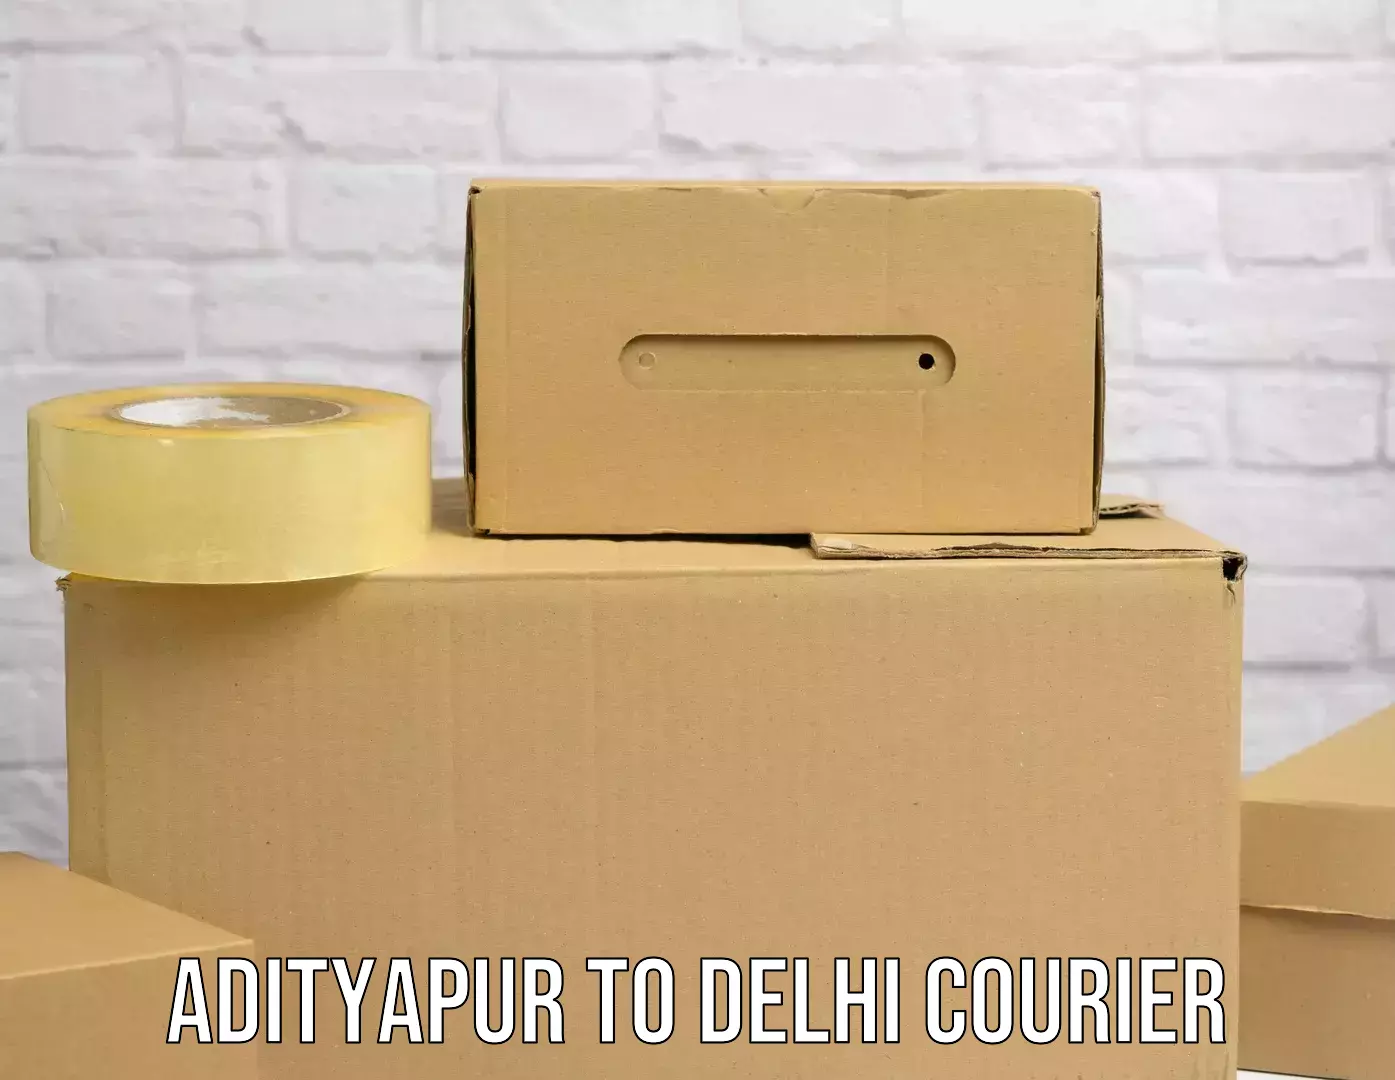 Customer-oriented courier services Adityapur to University of Delhi